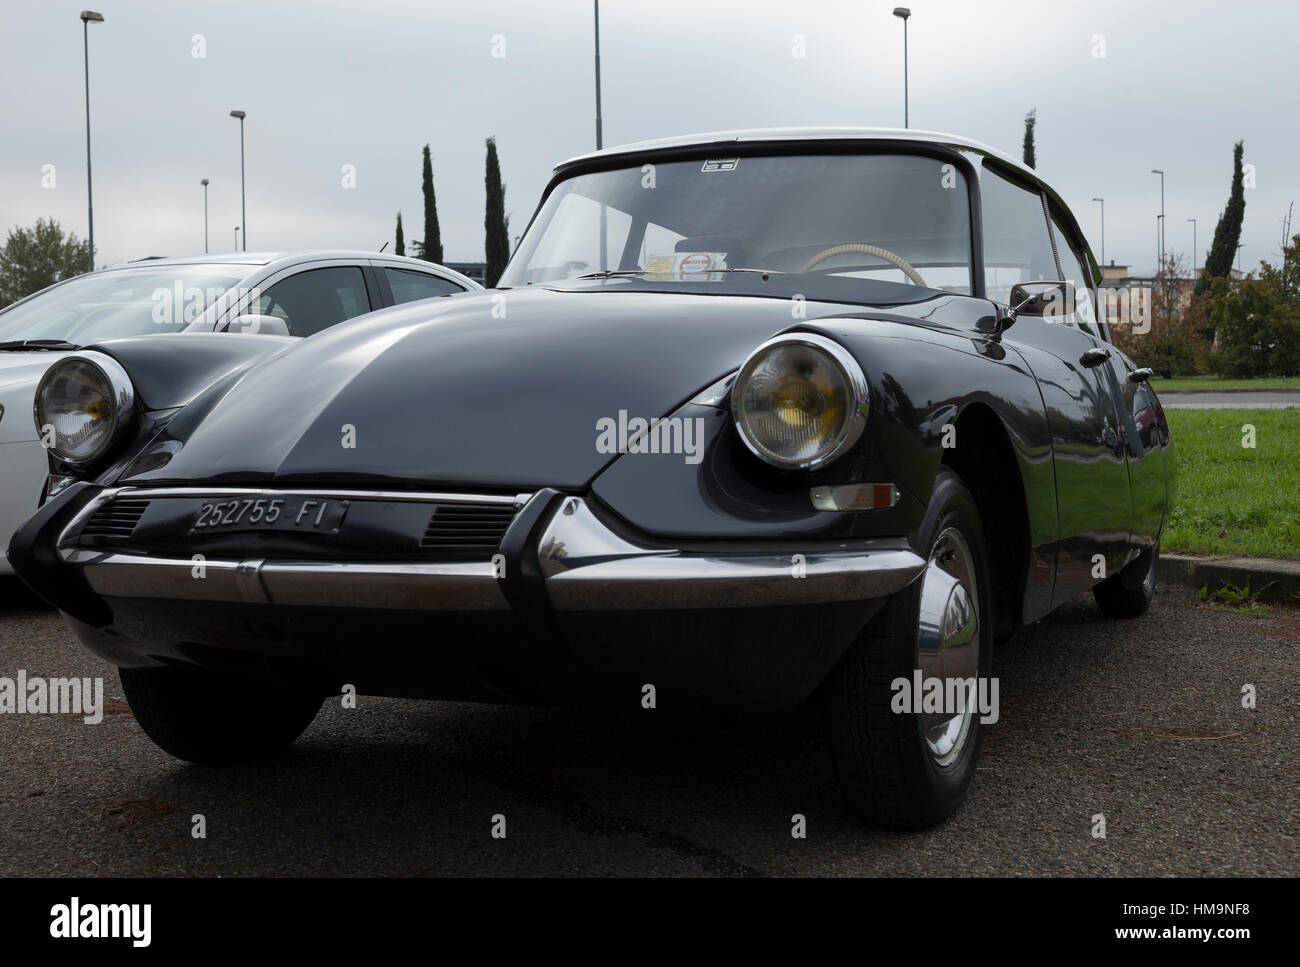 Citroen DS 19 side front view Stock Photo